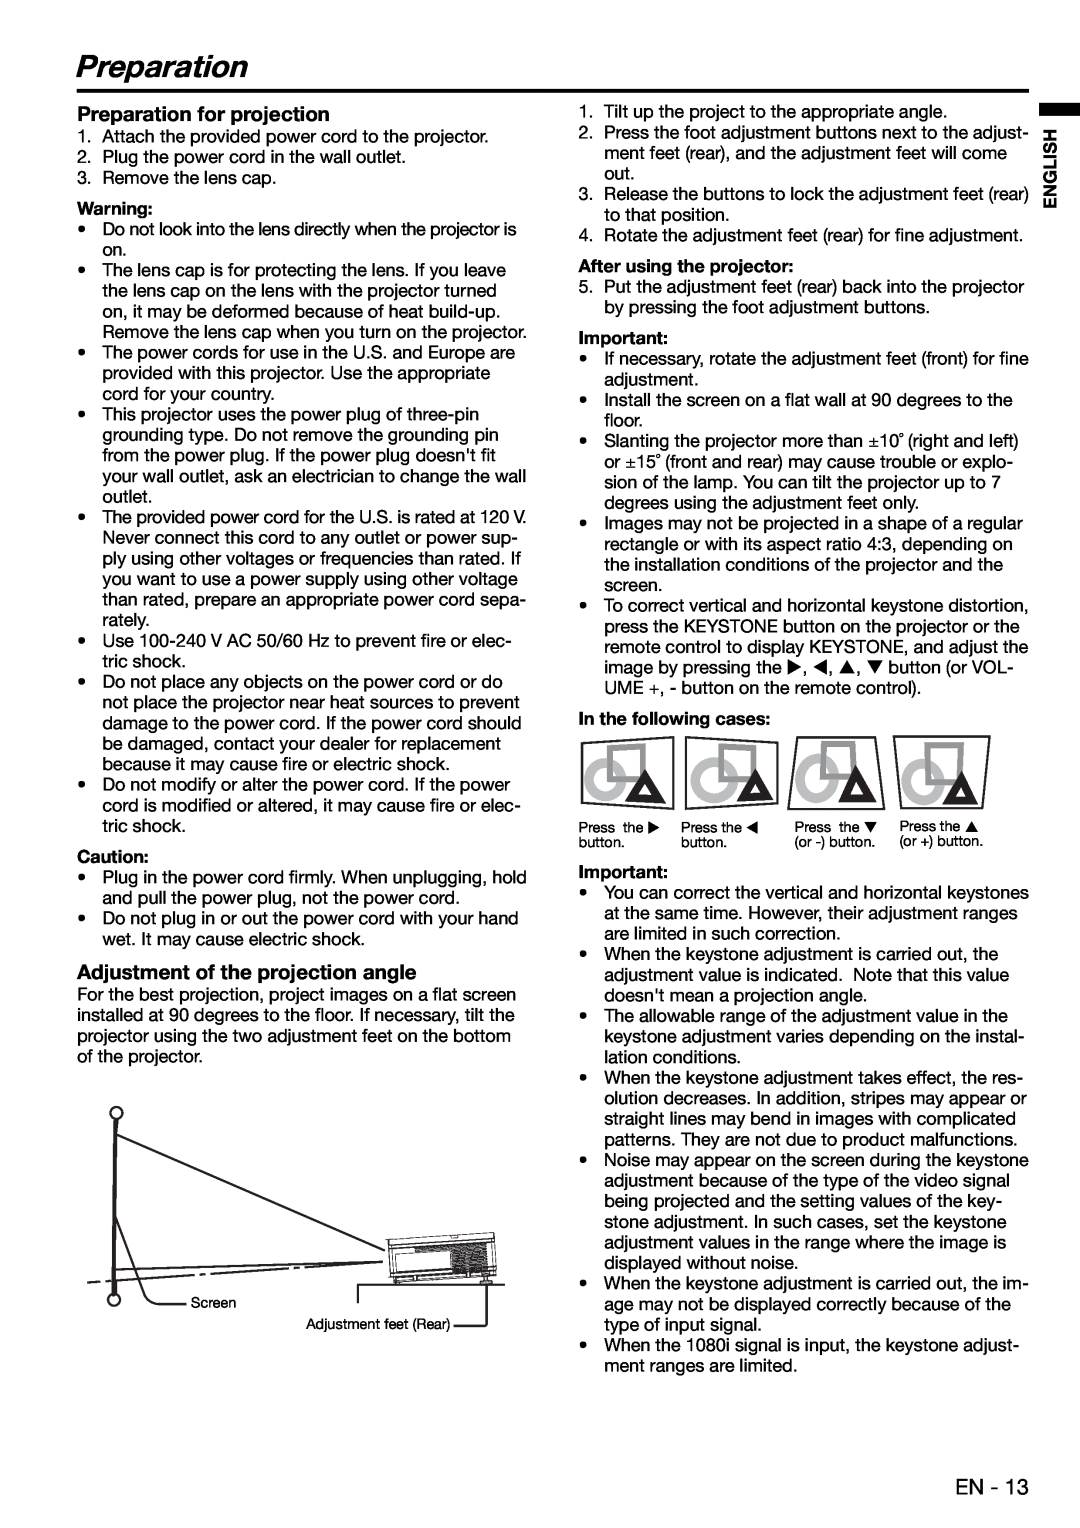 Mitsubishi Electronics XD480U user manual Preparation for projection, Adjustment of the projection angle 